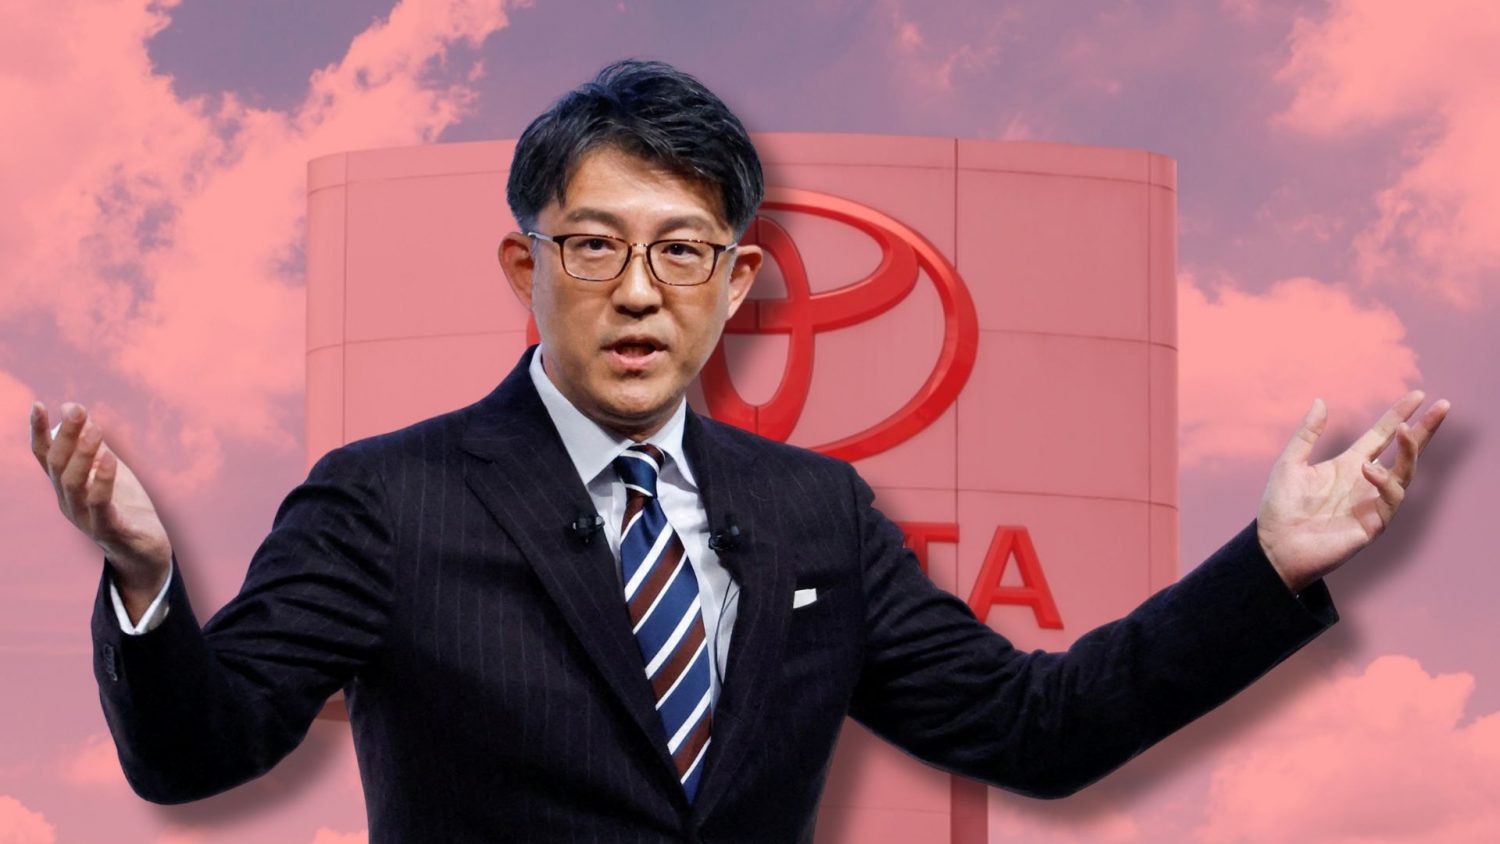 Toyota beat last year's volume by 7.3%, marking the first time in the company's history that global sales have exceeded 10 million units.